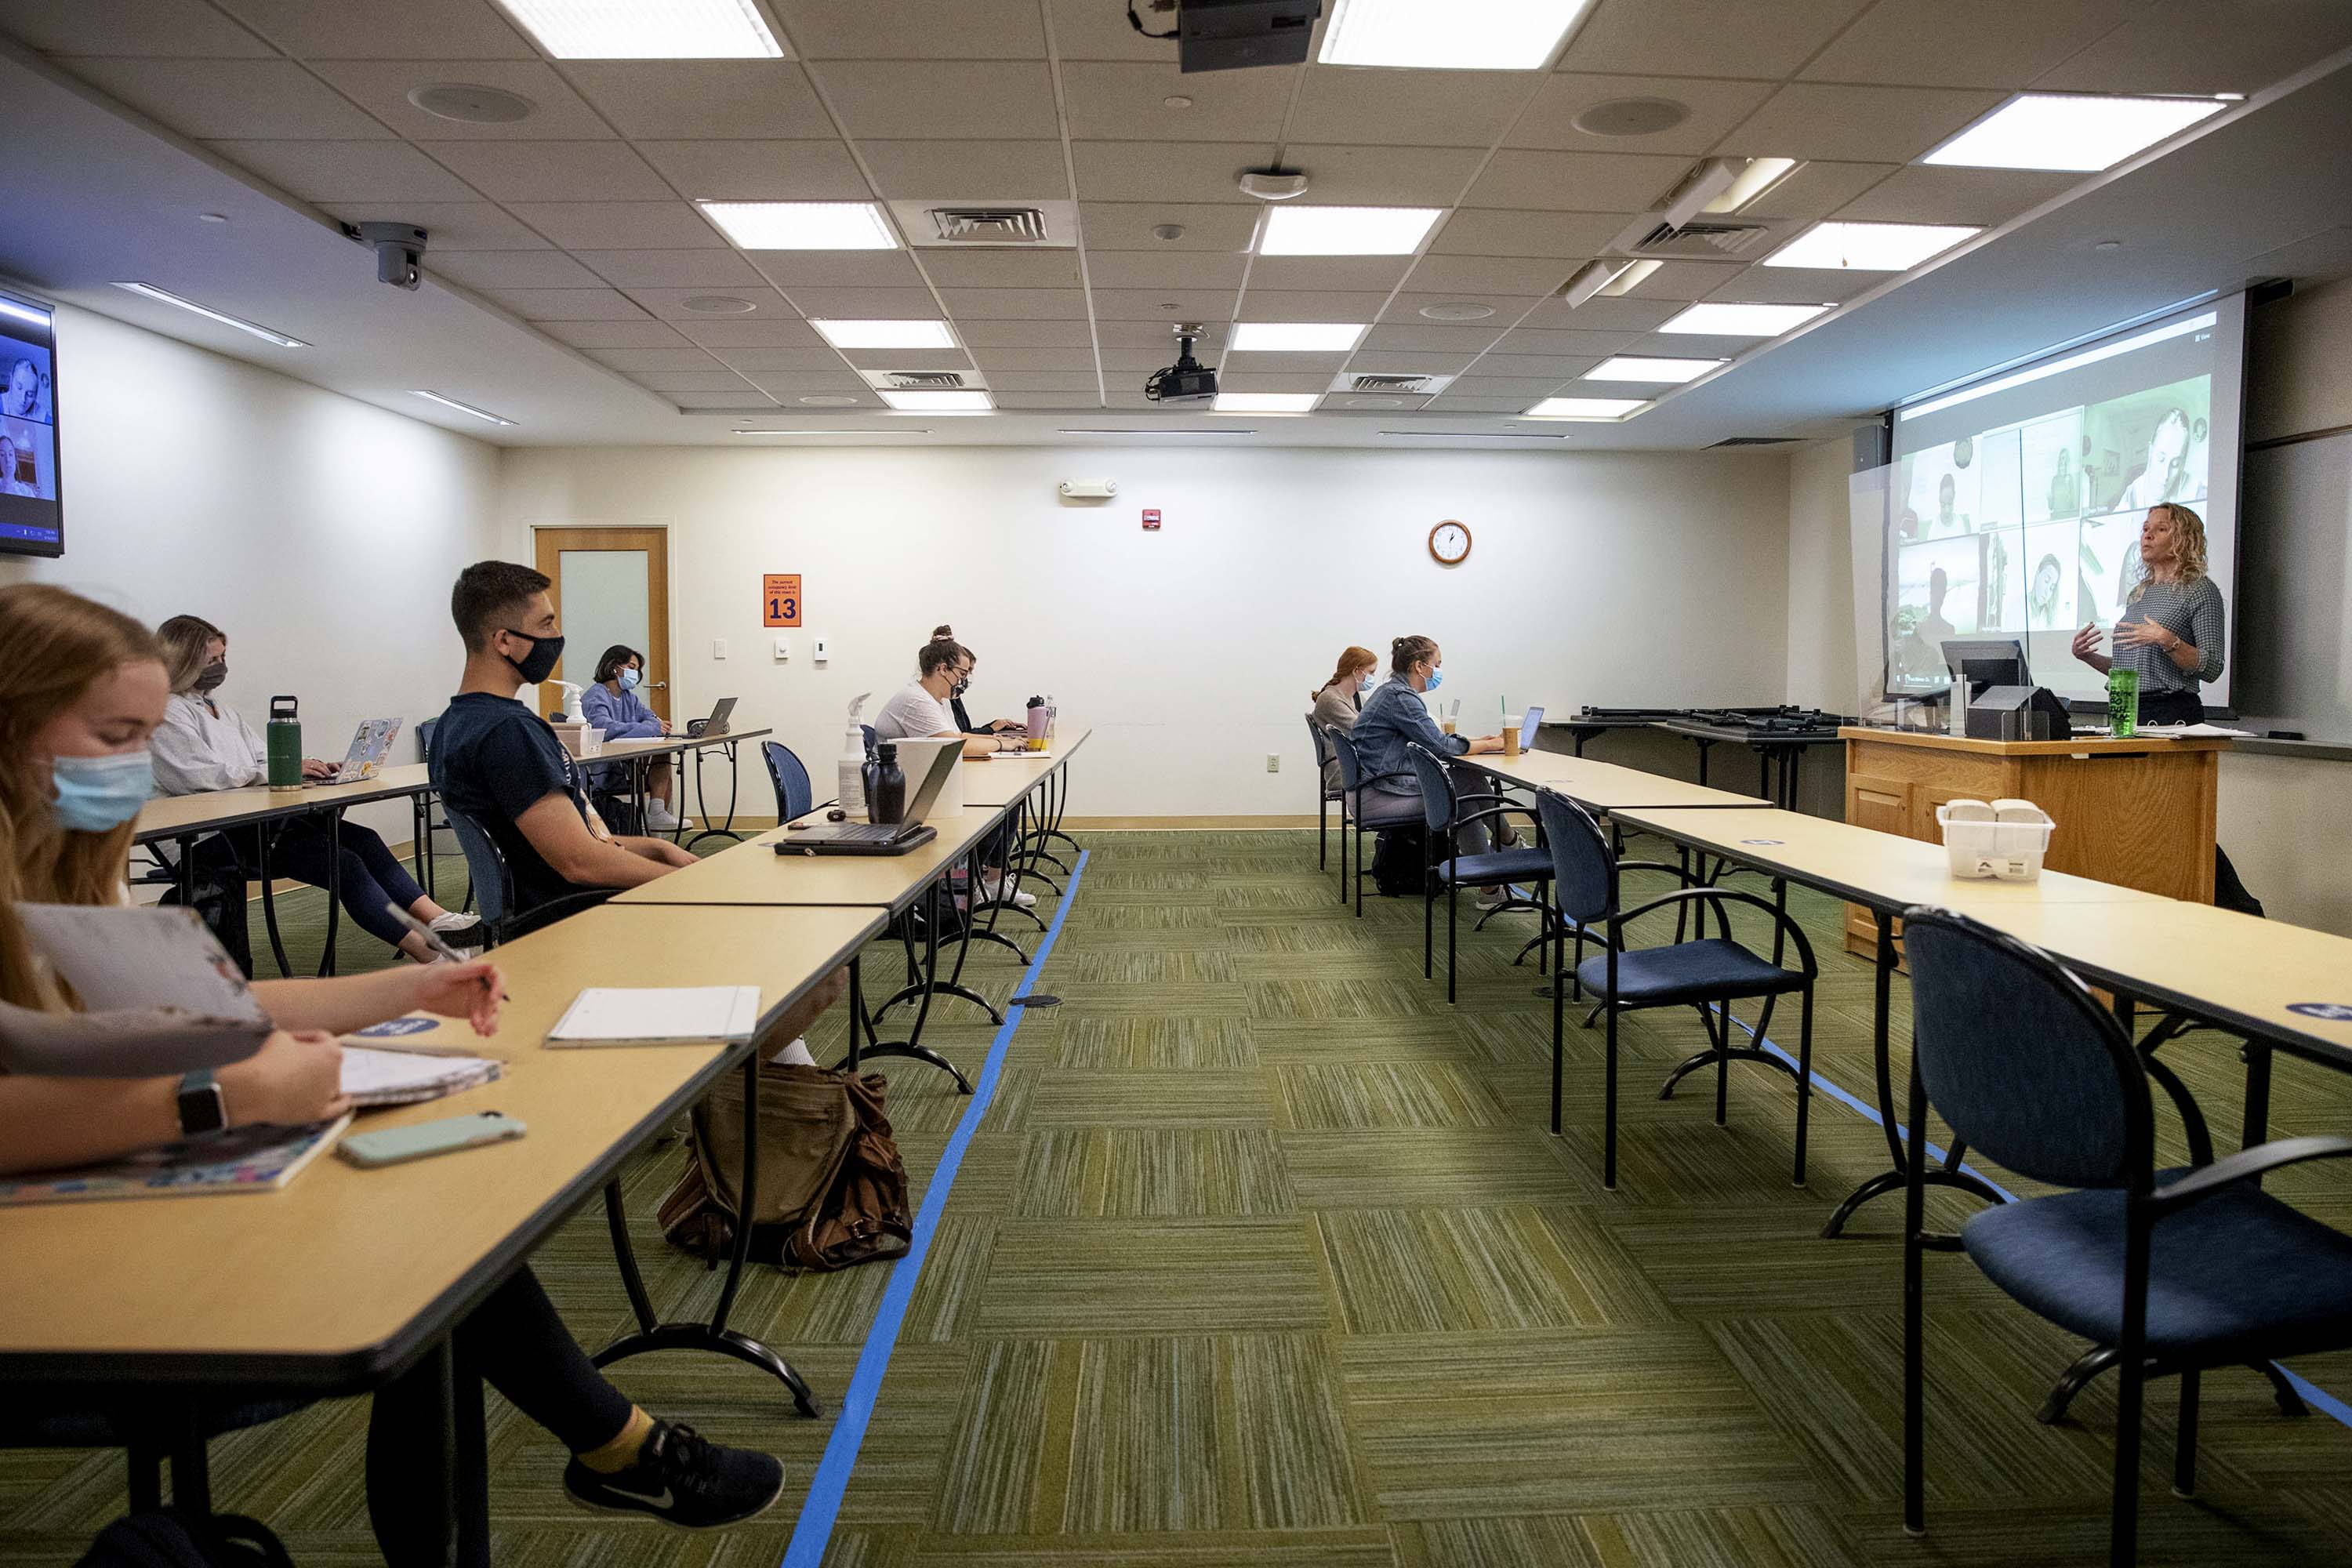 Similarly in smaller classrooms, spaces are marked and distanced, as in nursing professor Ashley Hurstâs class.